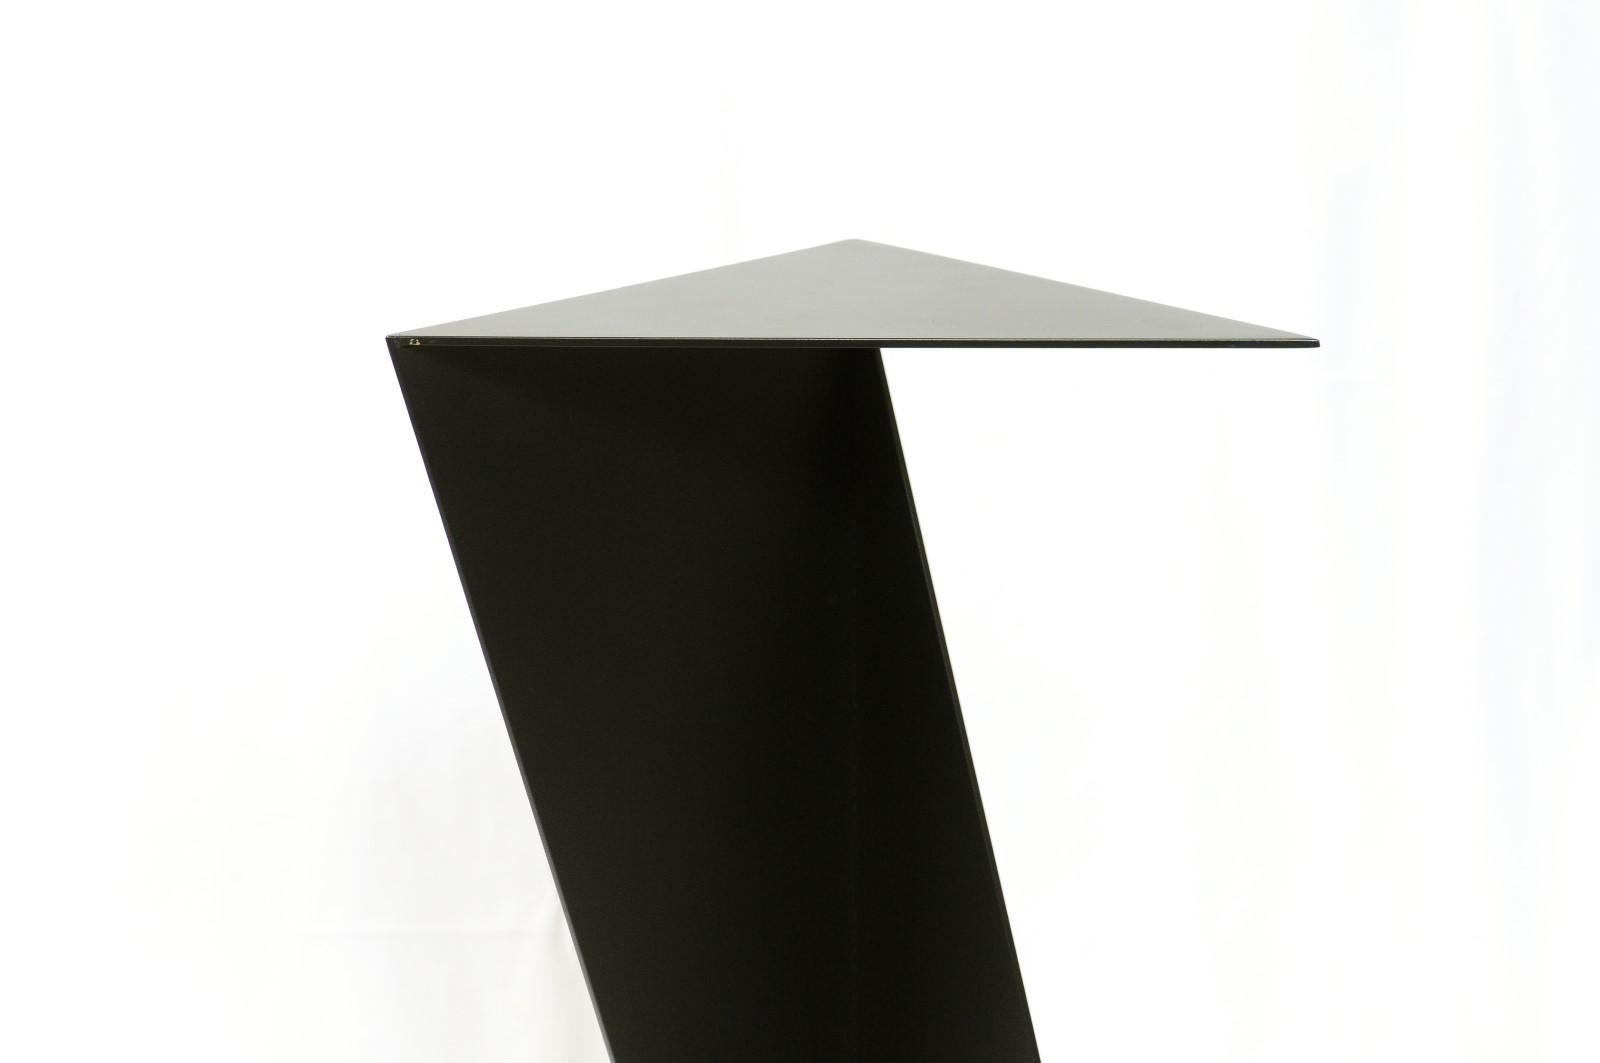 Origami style steel pedestal stand. Black finish. Dimensions: H: 36 inches: W: 17 inches: D: 8.5 inches.